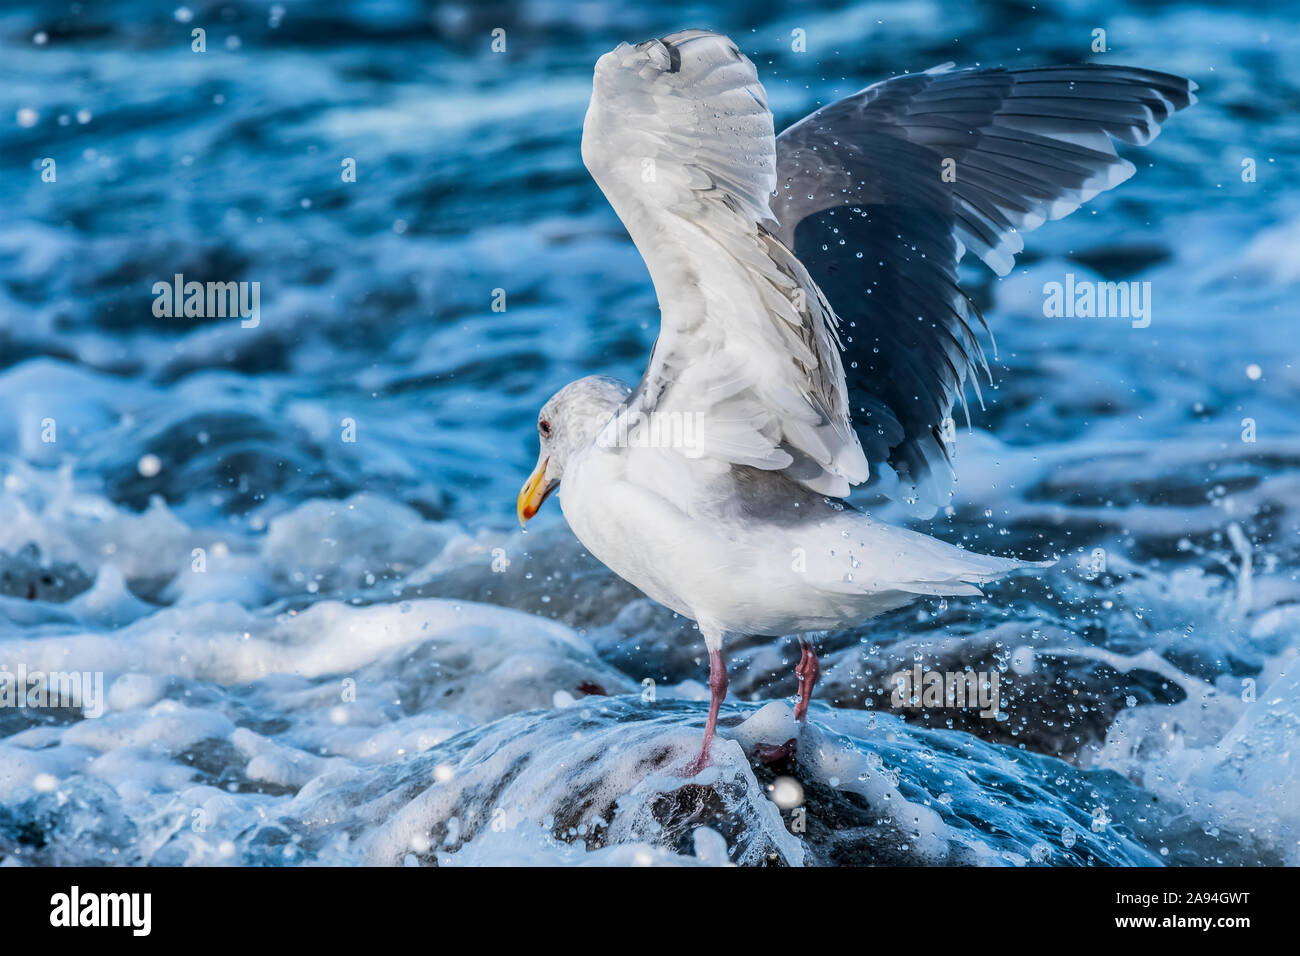 A Glaucous-winged Gull (Larus glaucescens) recovers after being struck by a wave at Seaside Cove on the Oregon Coast Stock Photo